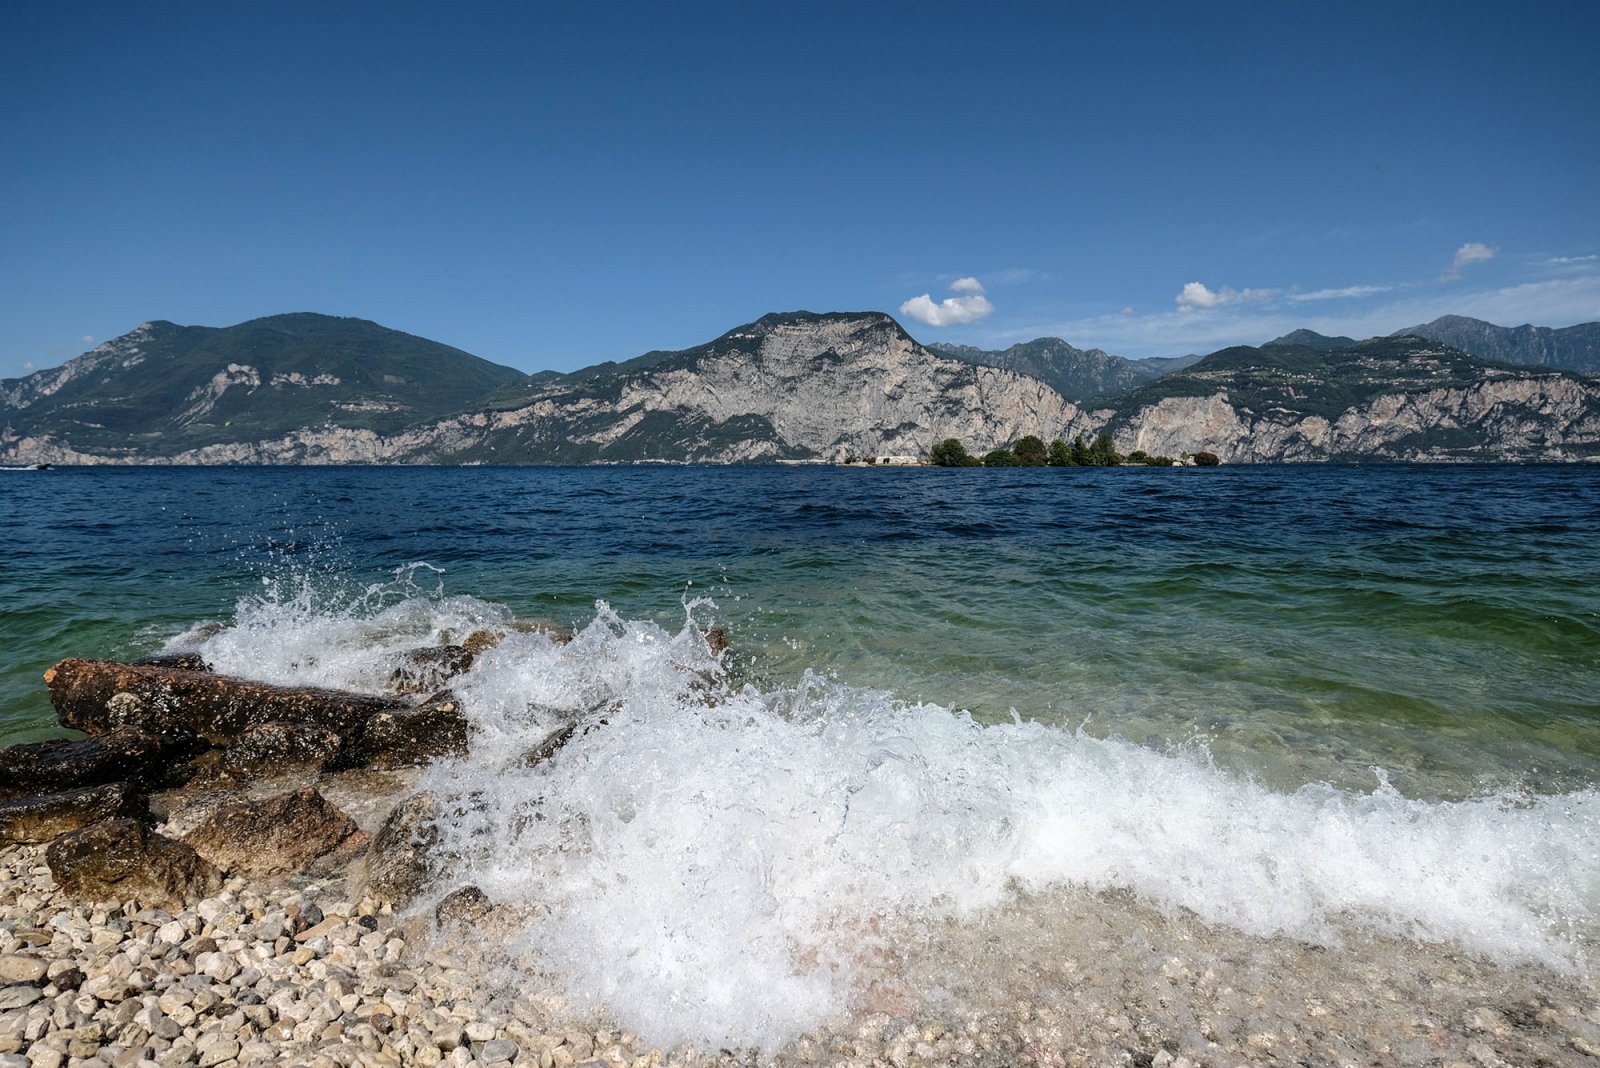 The beauty of rocky beaches and clear water in Brenzone at Lake Garda